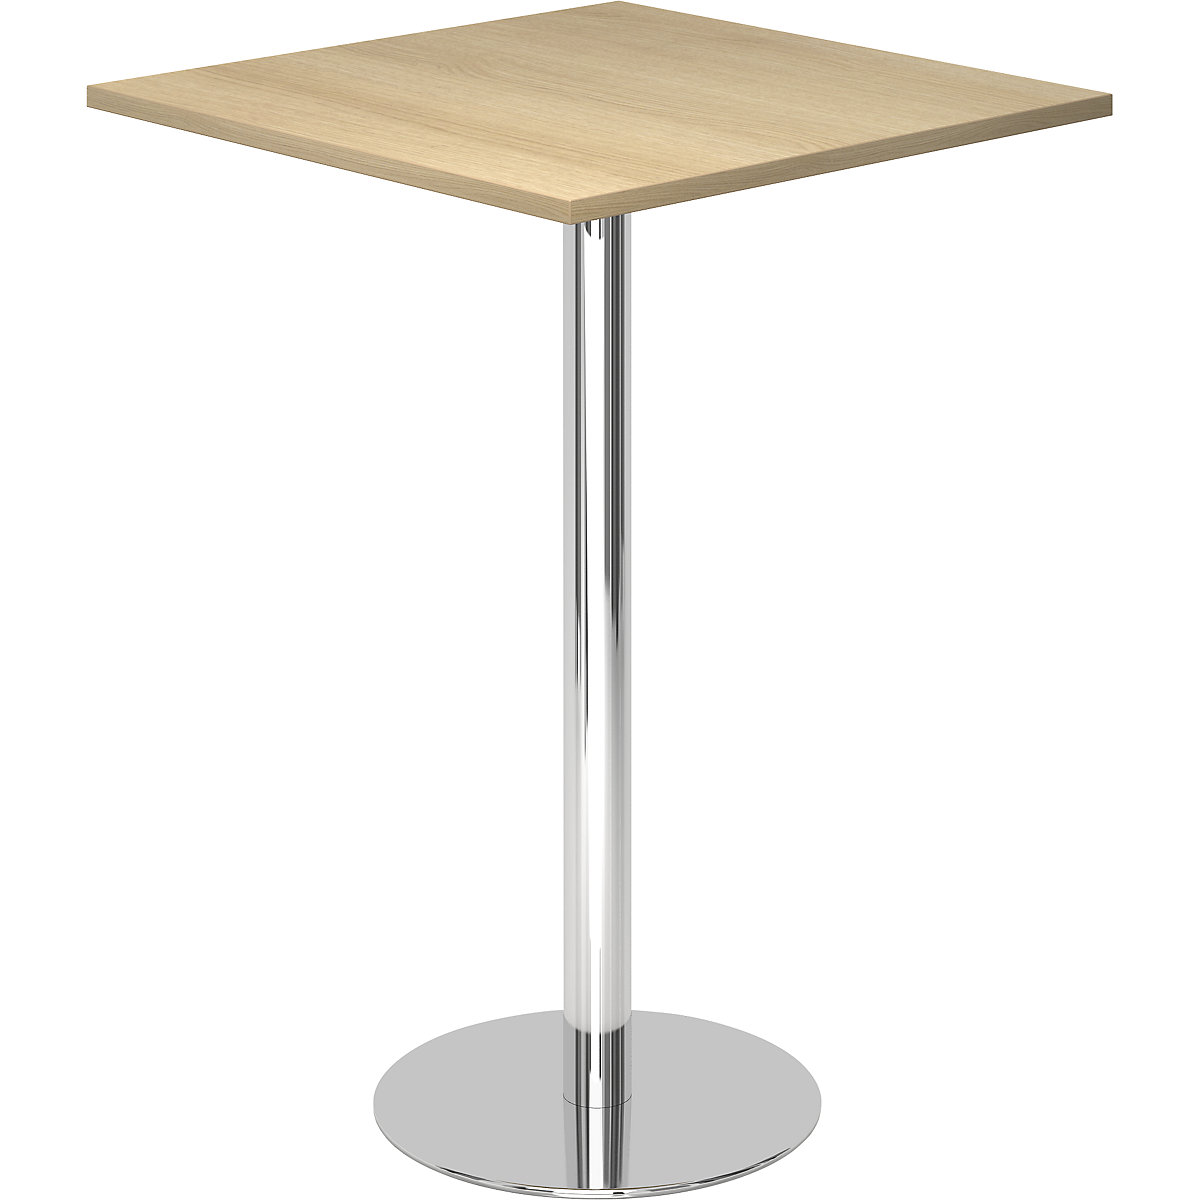 Pedestal table, LxW 800 x 800 mm